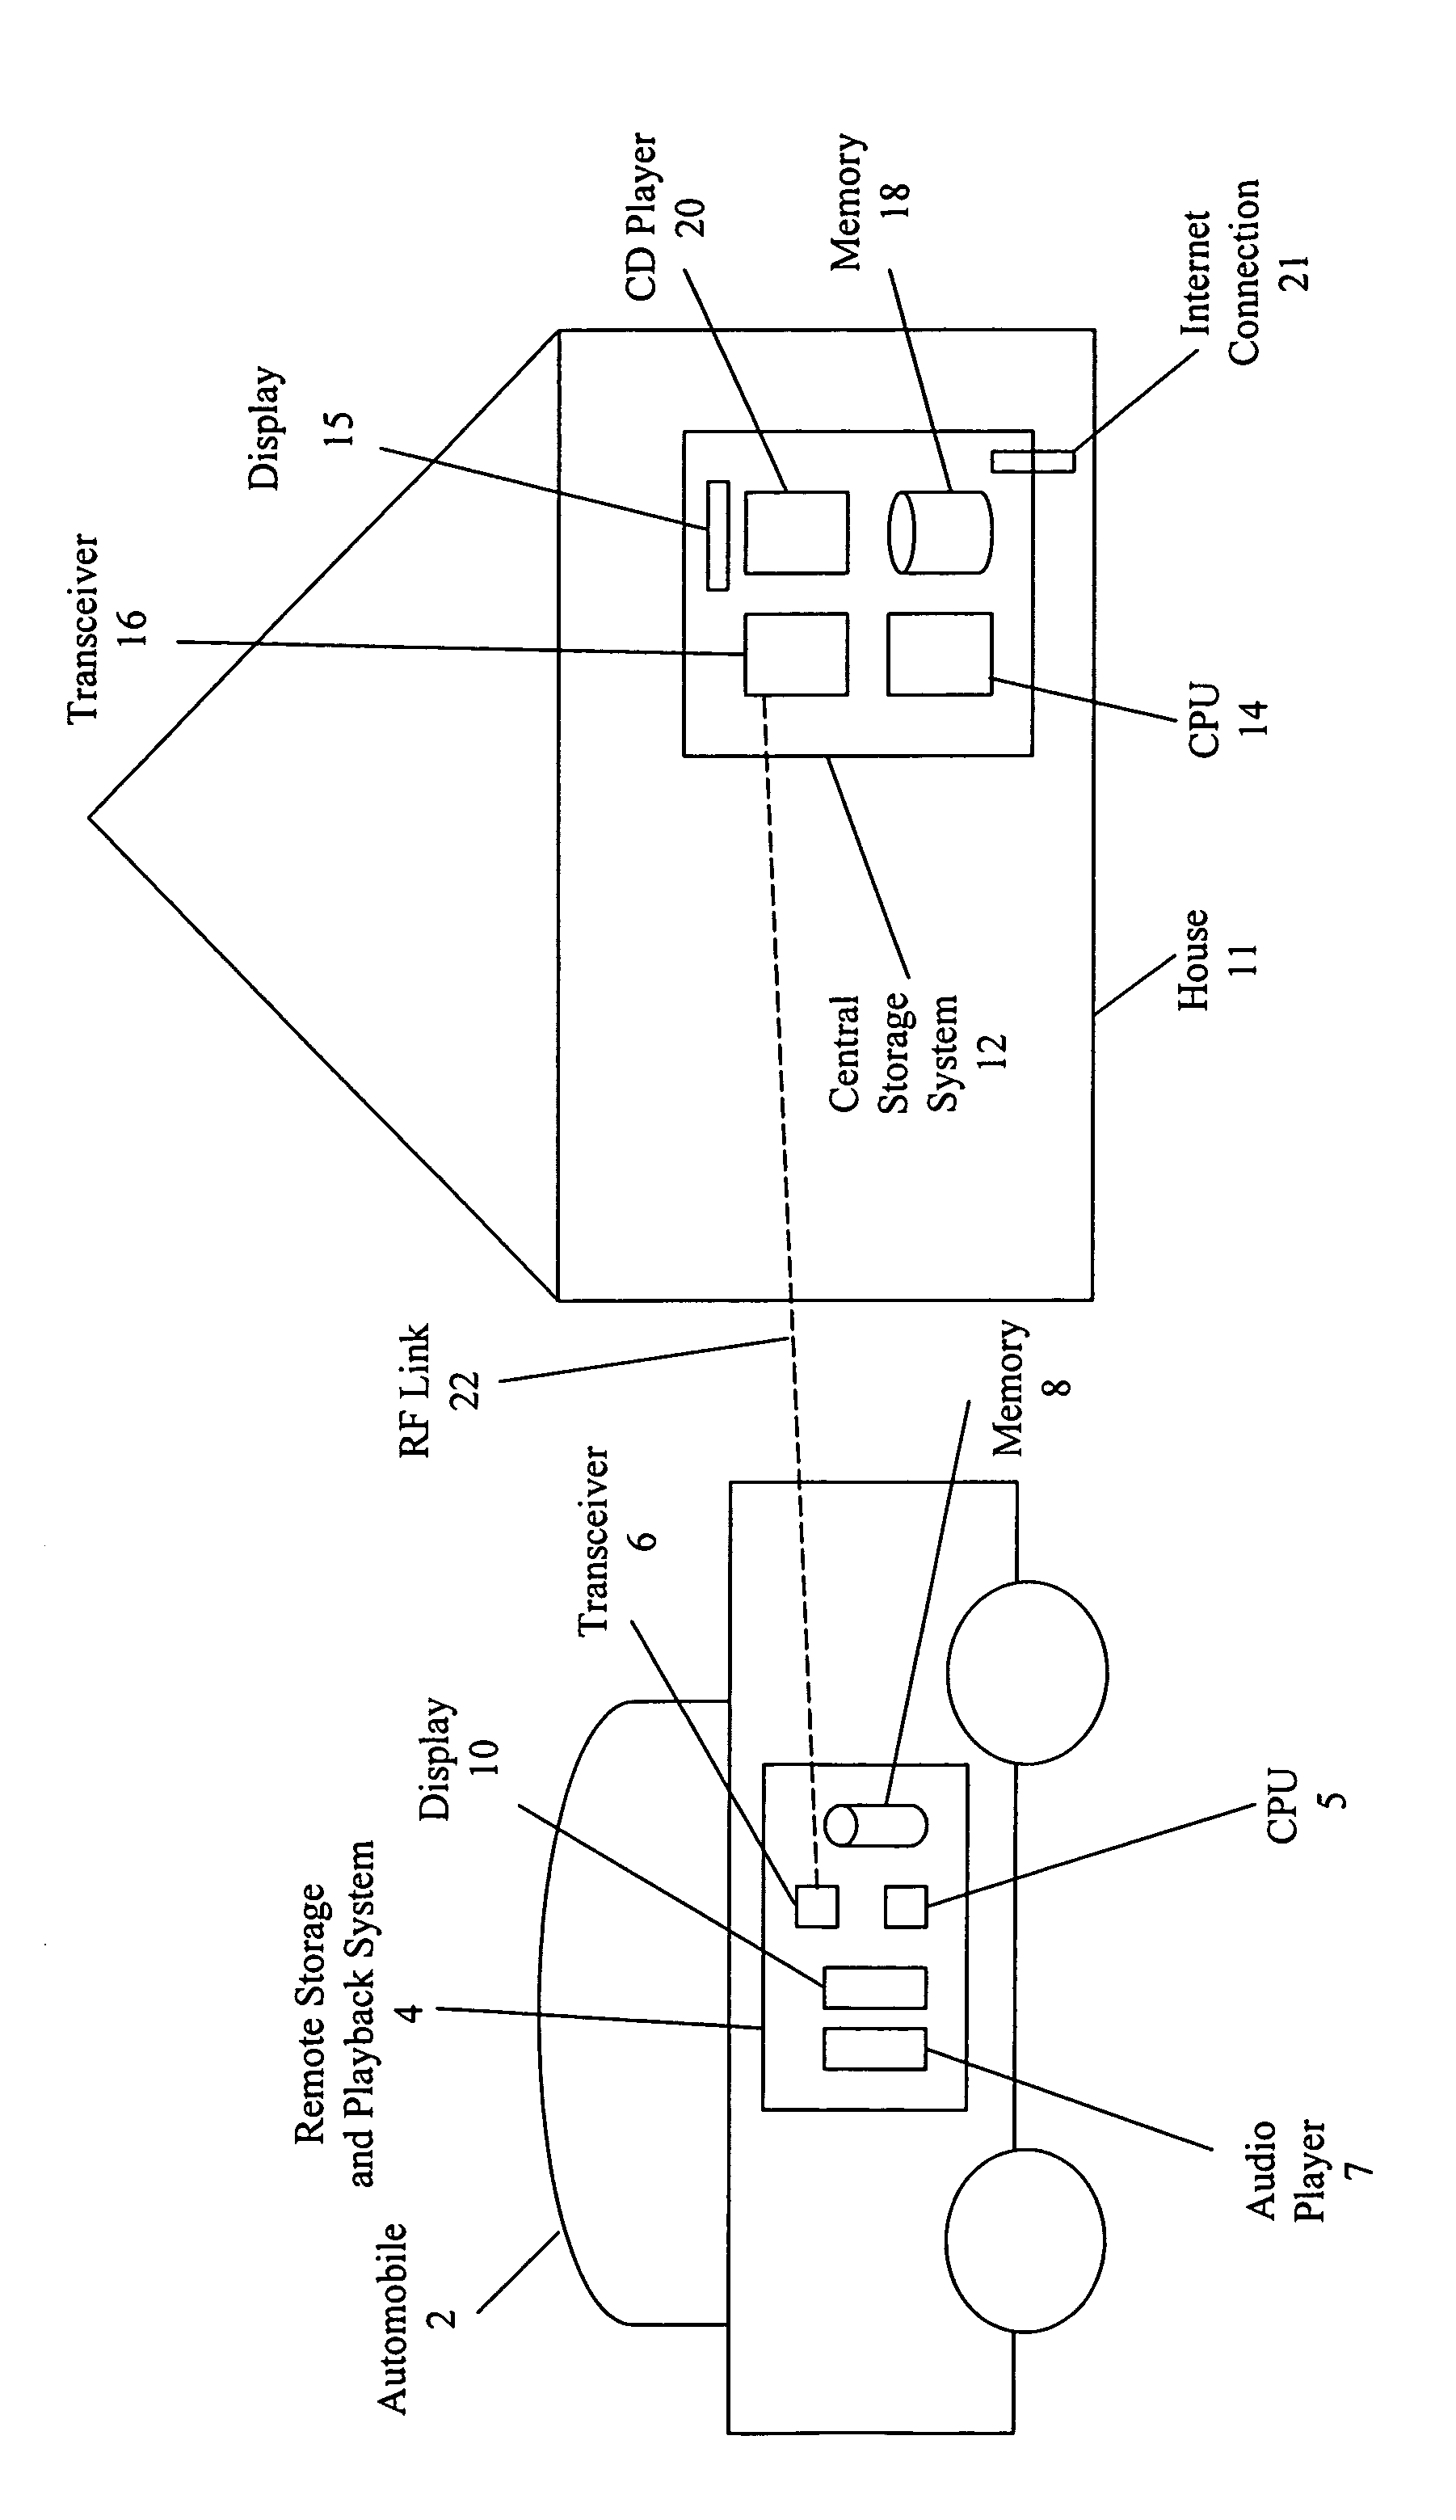 System and method for communicating data via a wireless high speed link